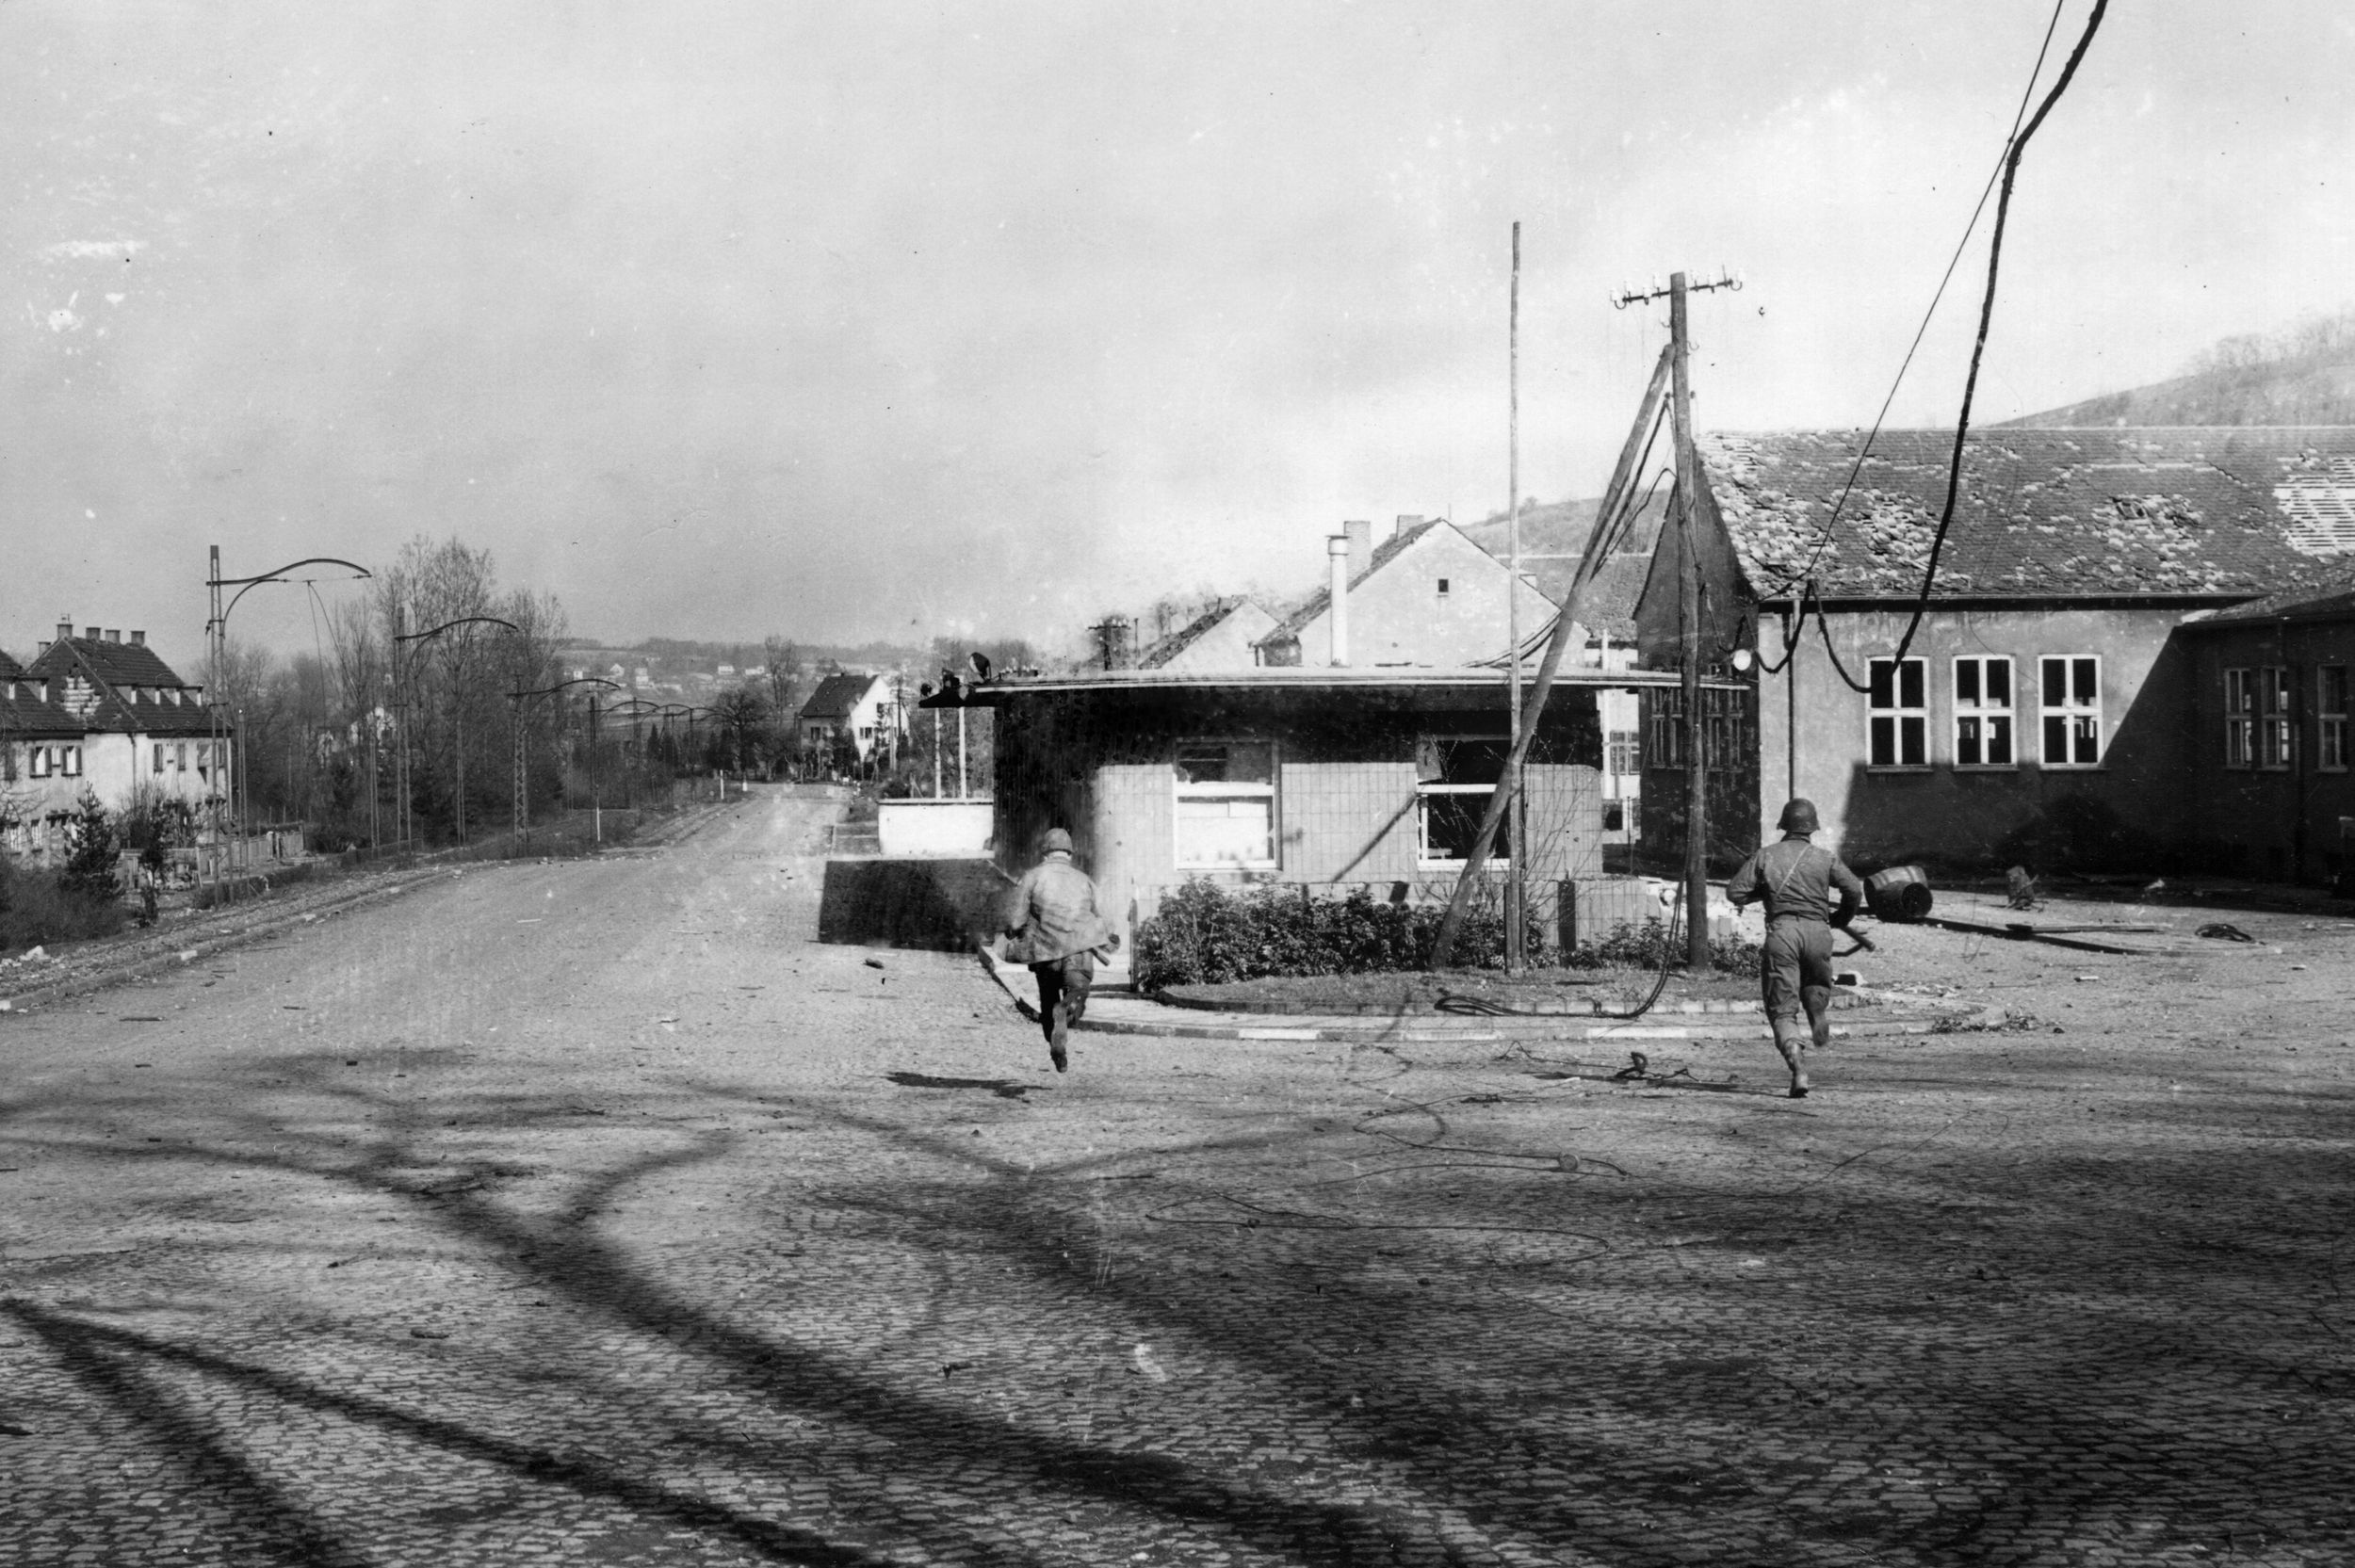 Soldiers of the 275th Infantry Regiment, 70th Division, sprint across open ground in the border town of Stiring-Wendel, south of Saarbrücken.